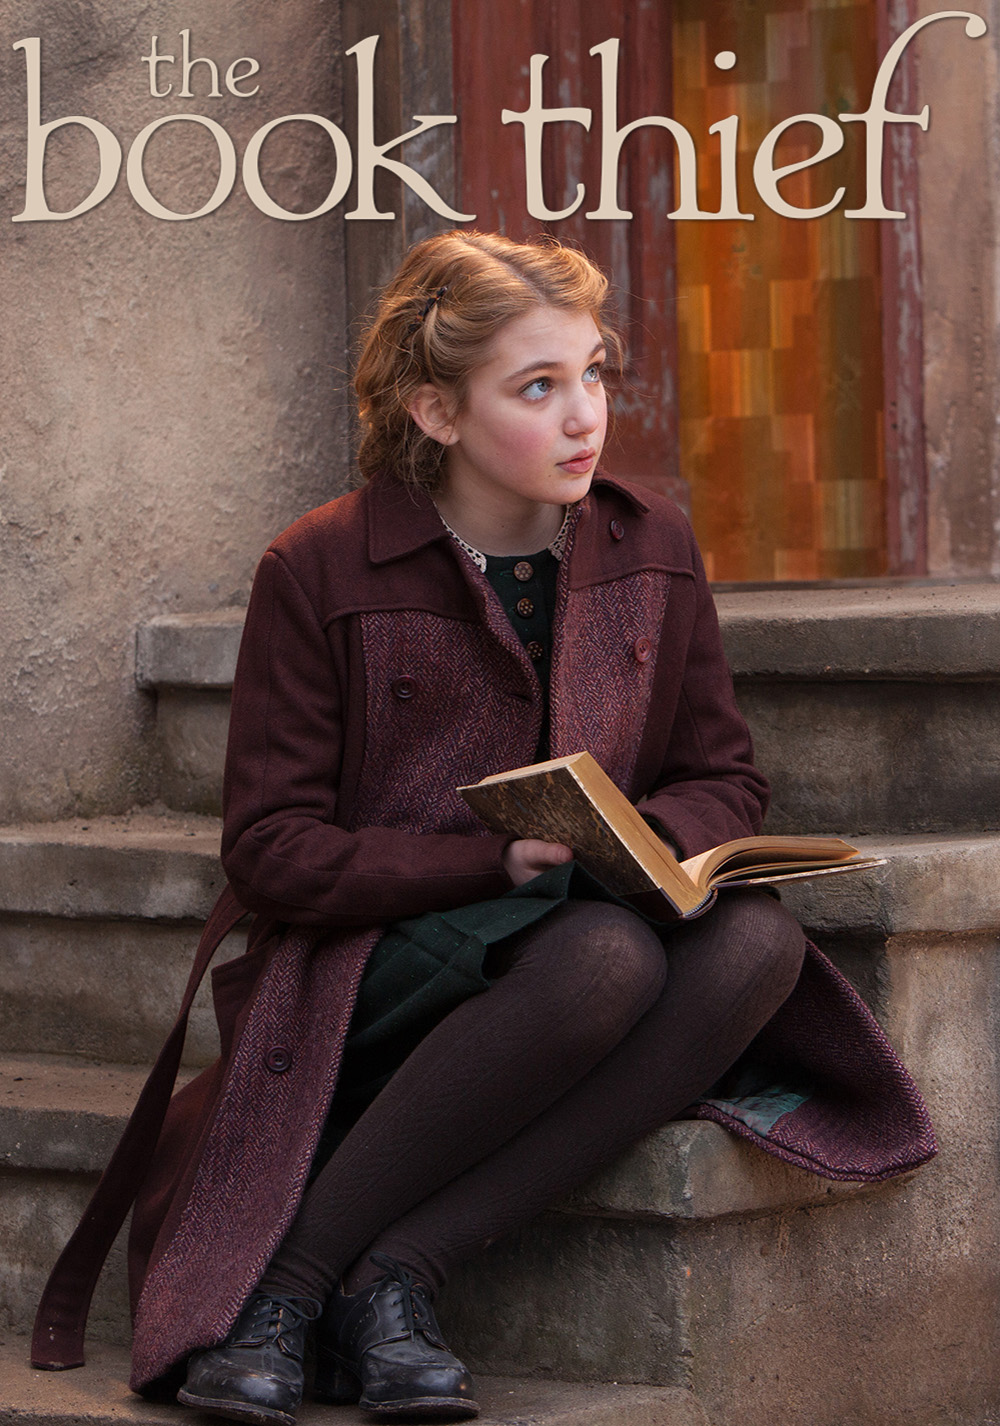 book review of the book thief